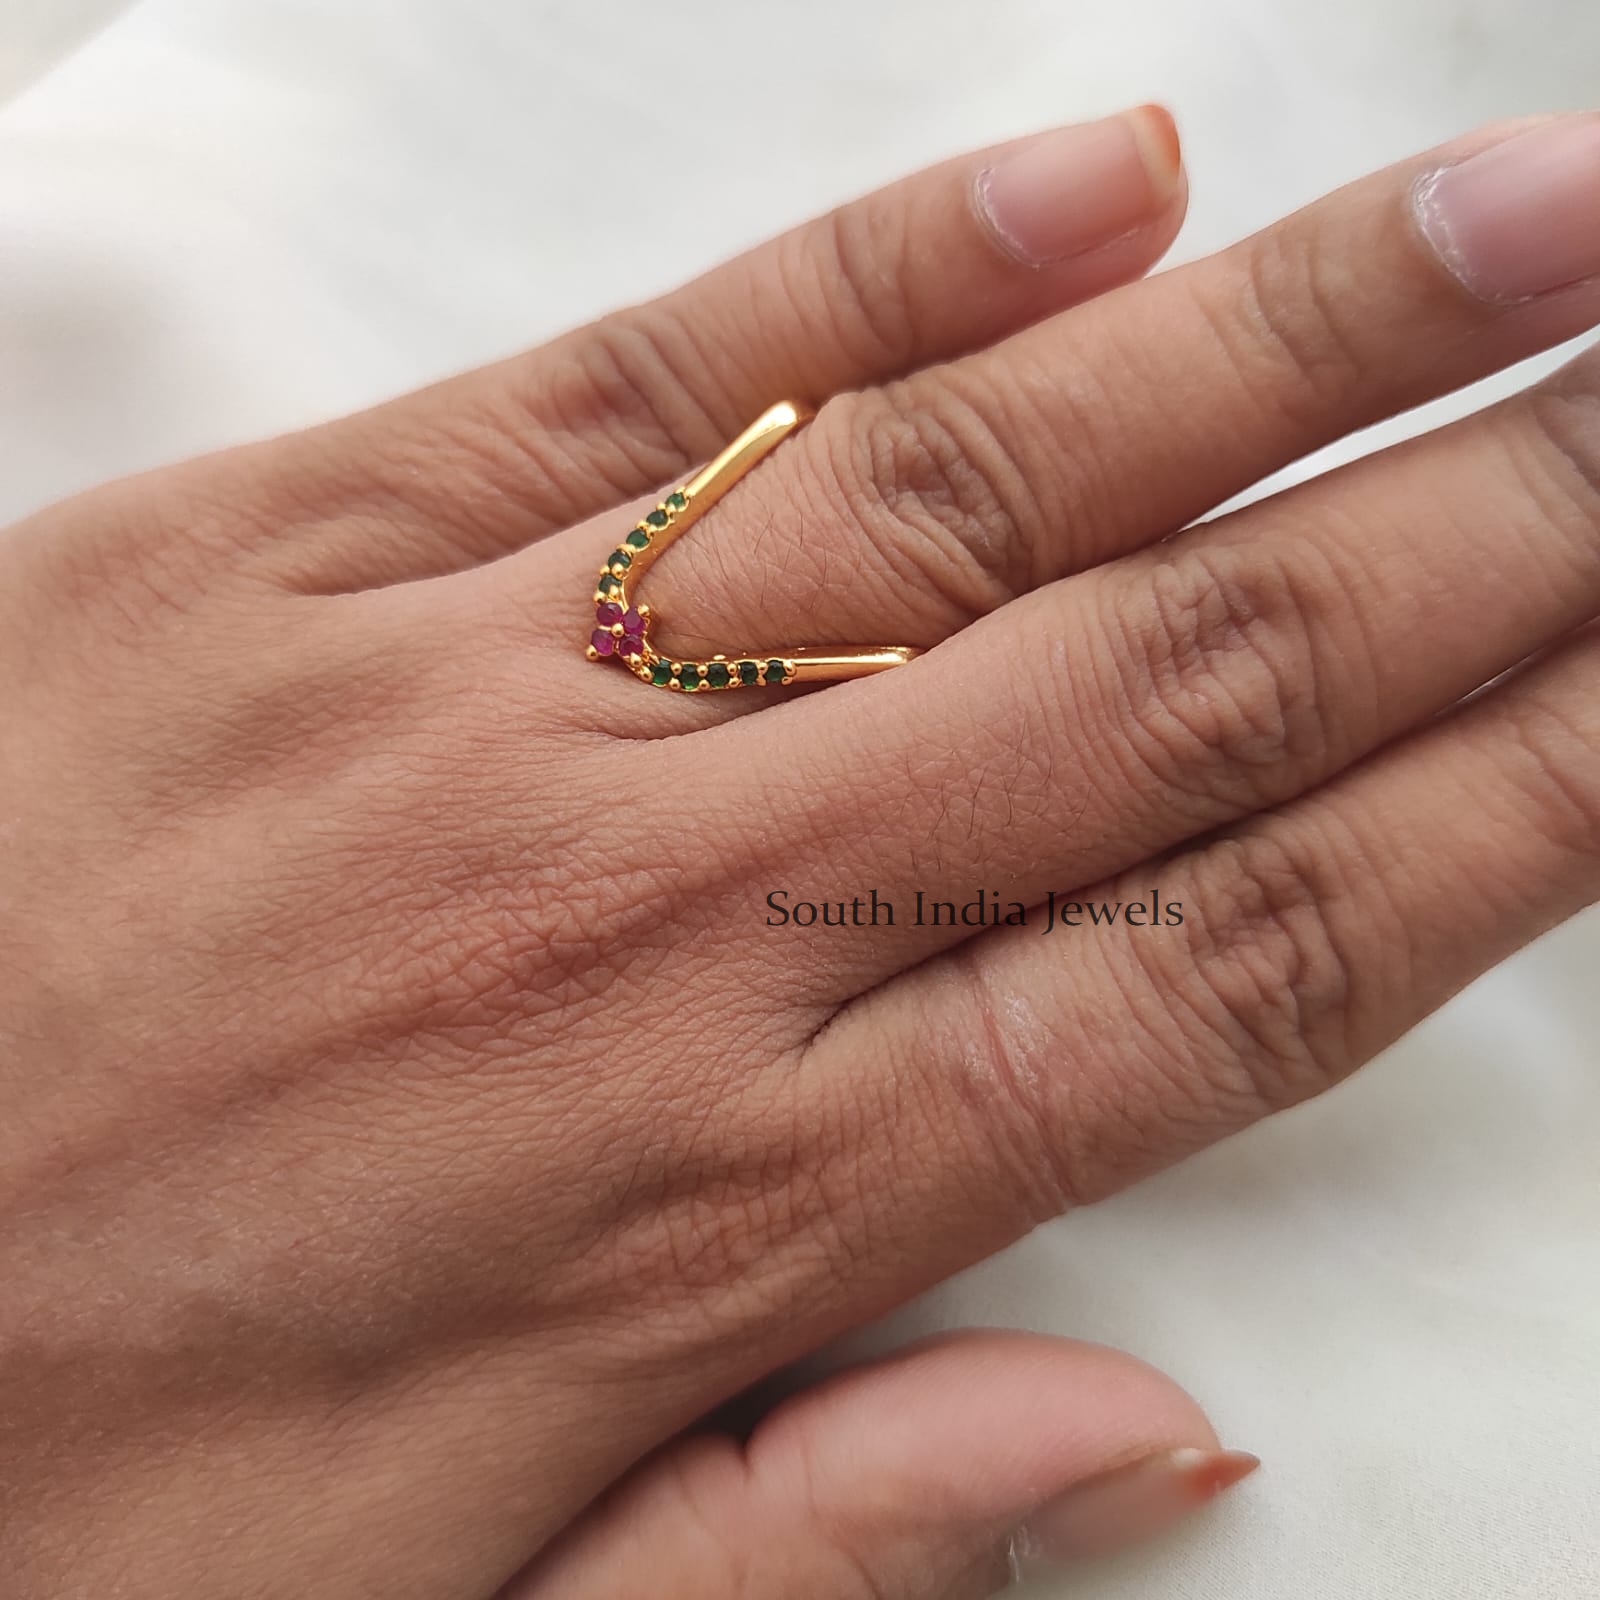 Vodyungila | Hand jewelry rings, Gold finger rings, Gold ring designs